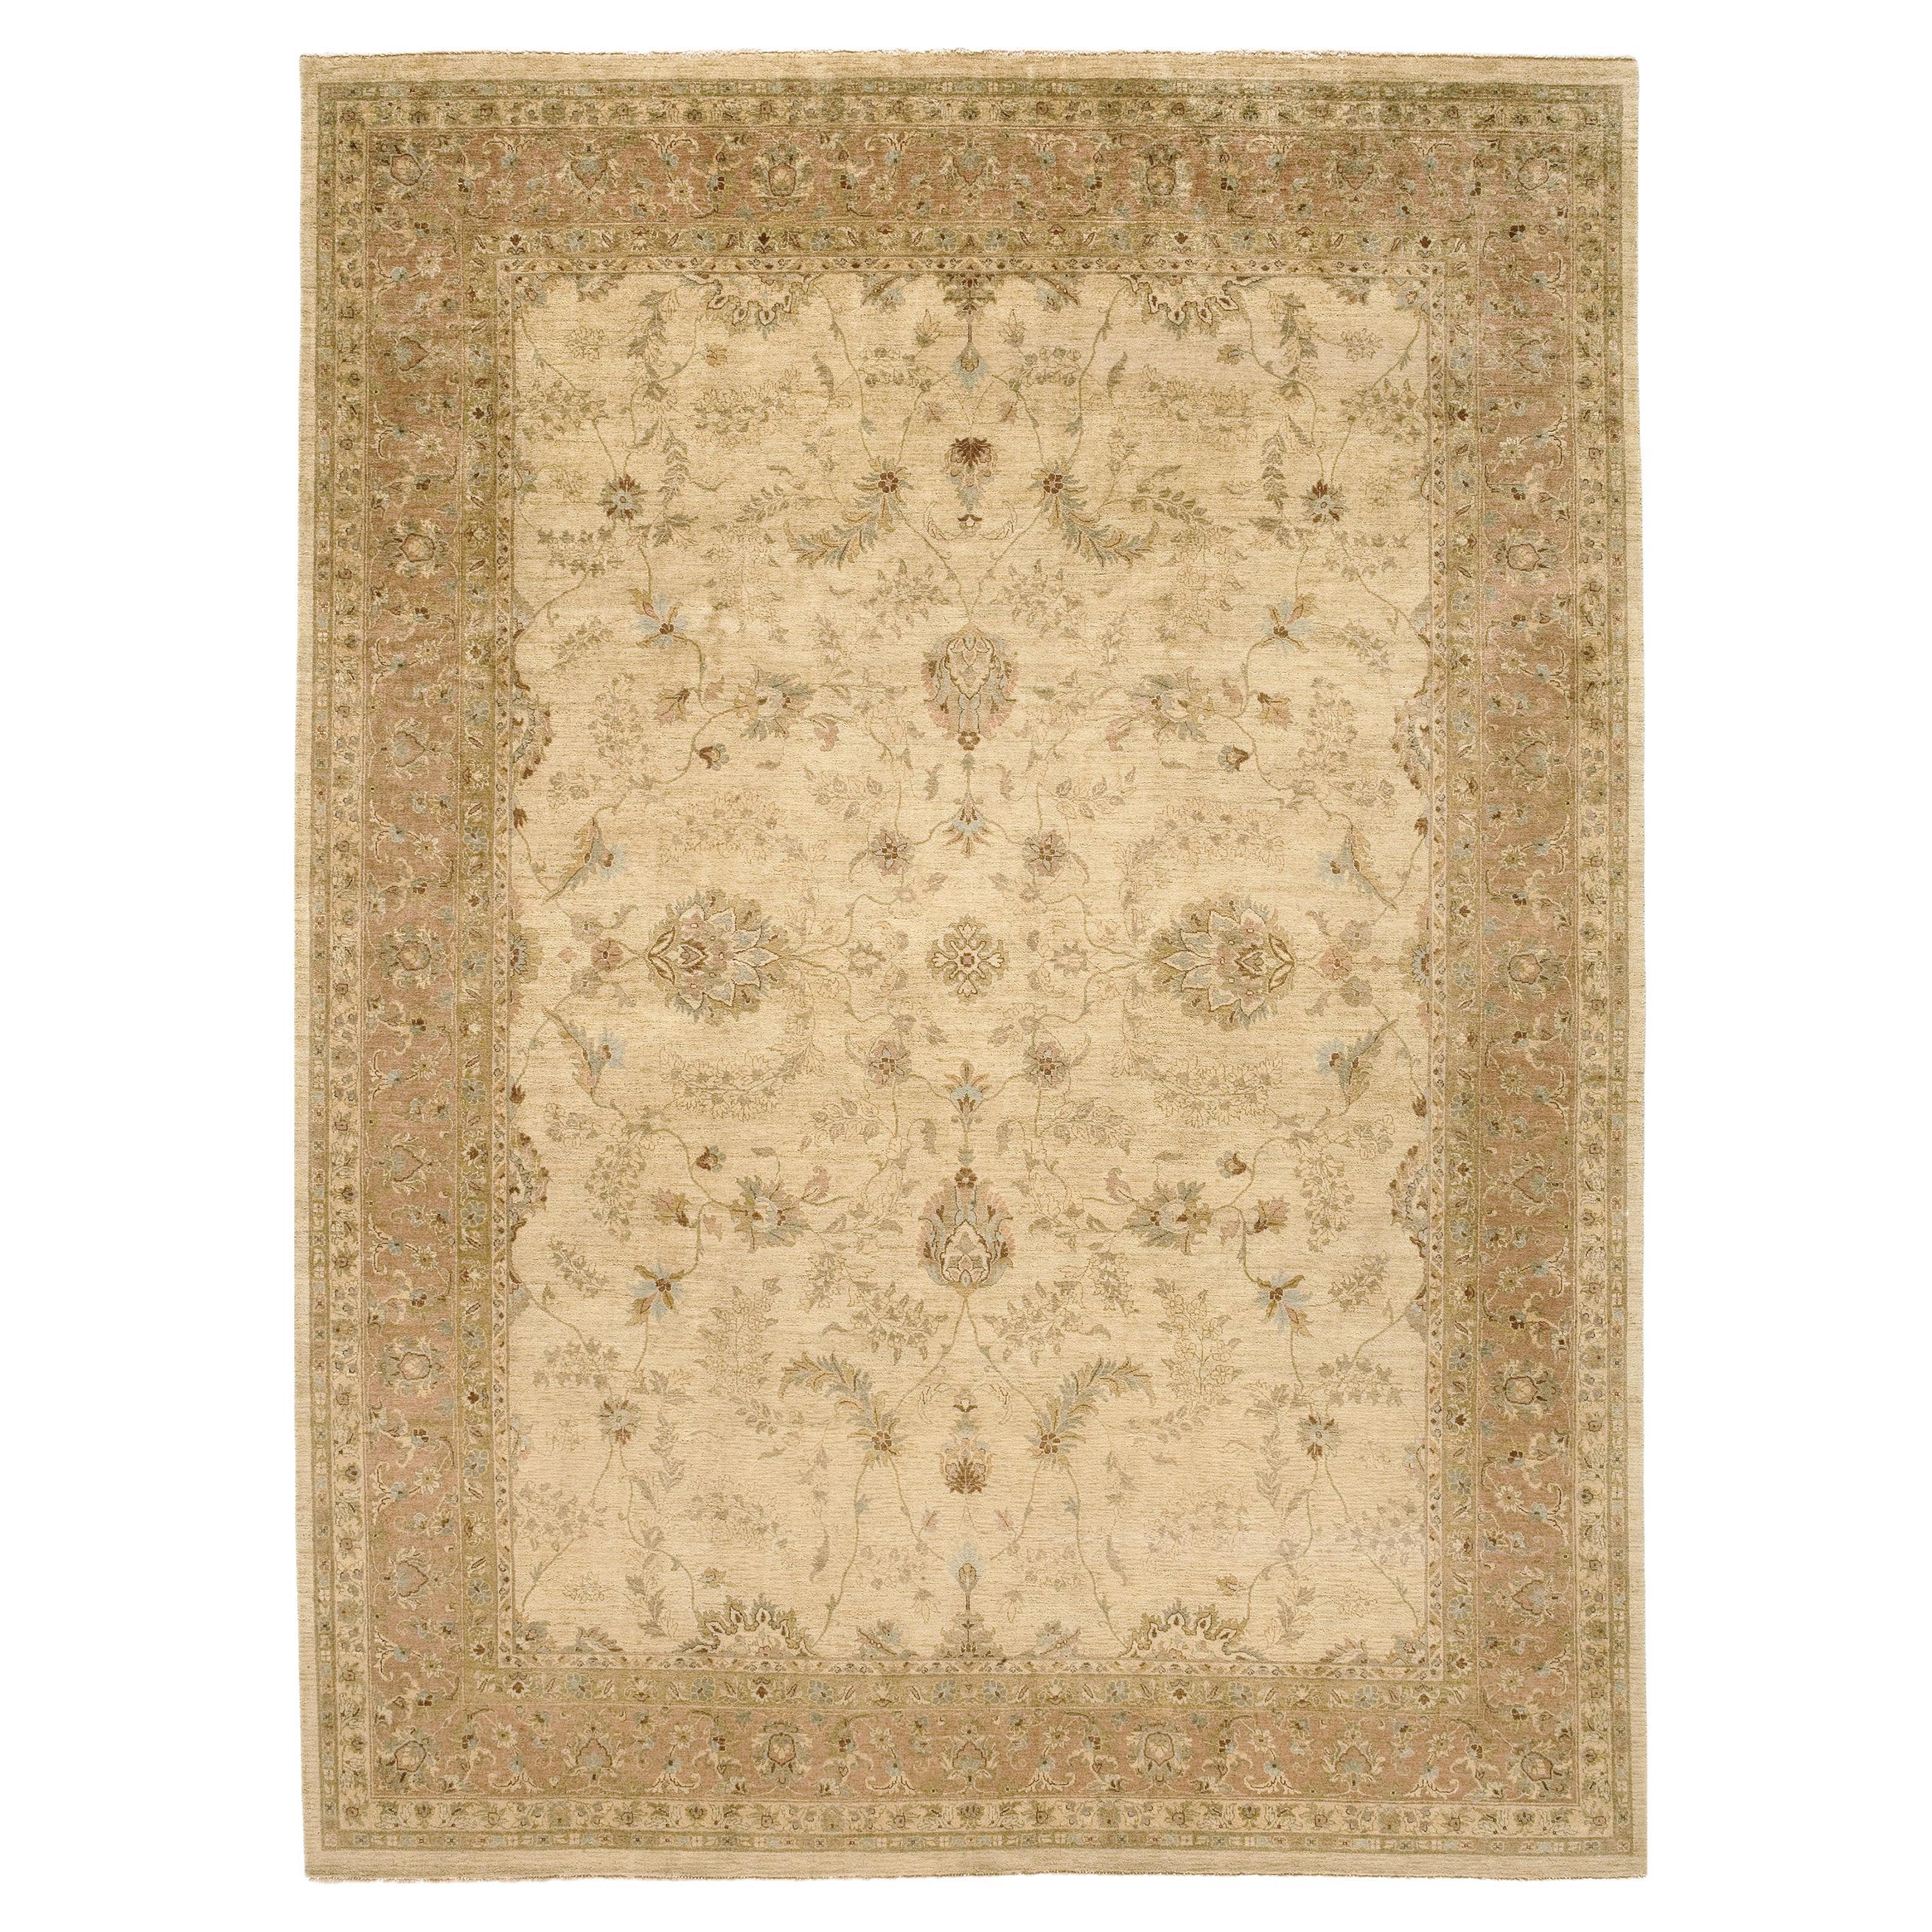 Luxury Traditional Hand-Knotted Lilihan Cream and Melon 12x18 Rug